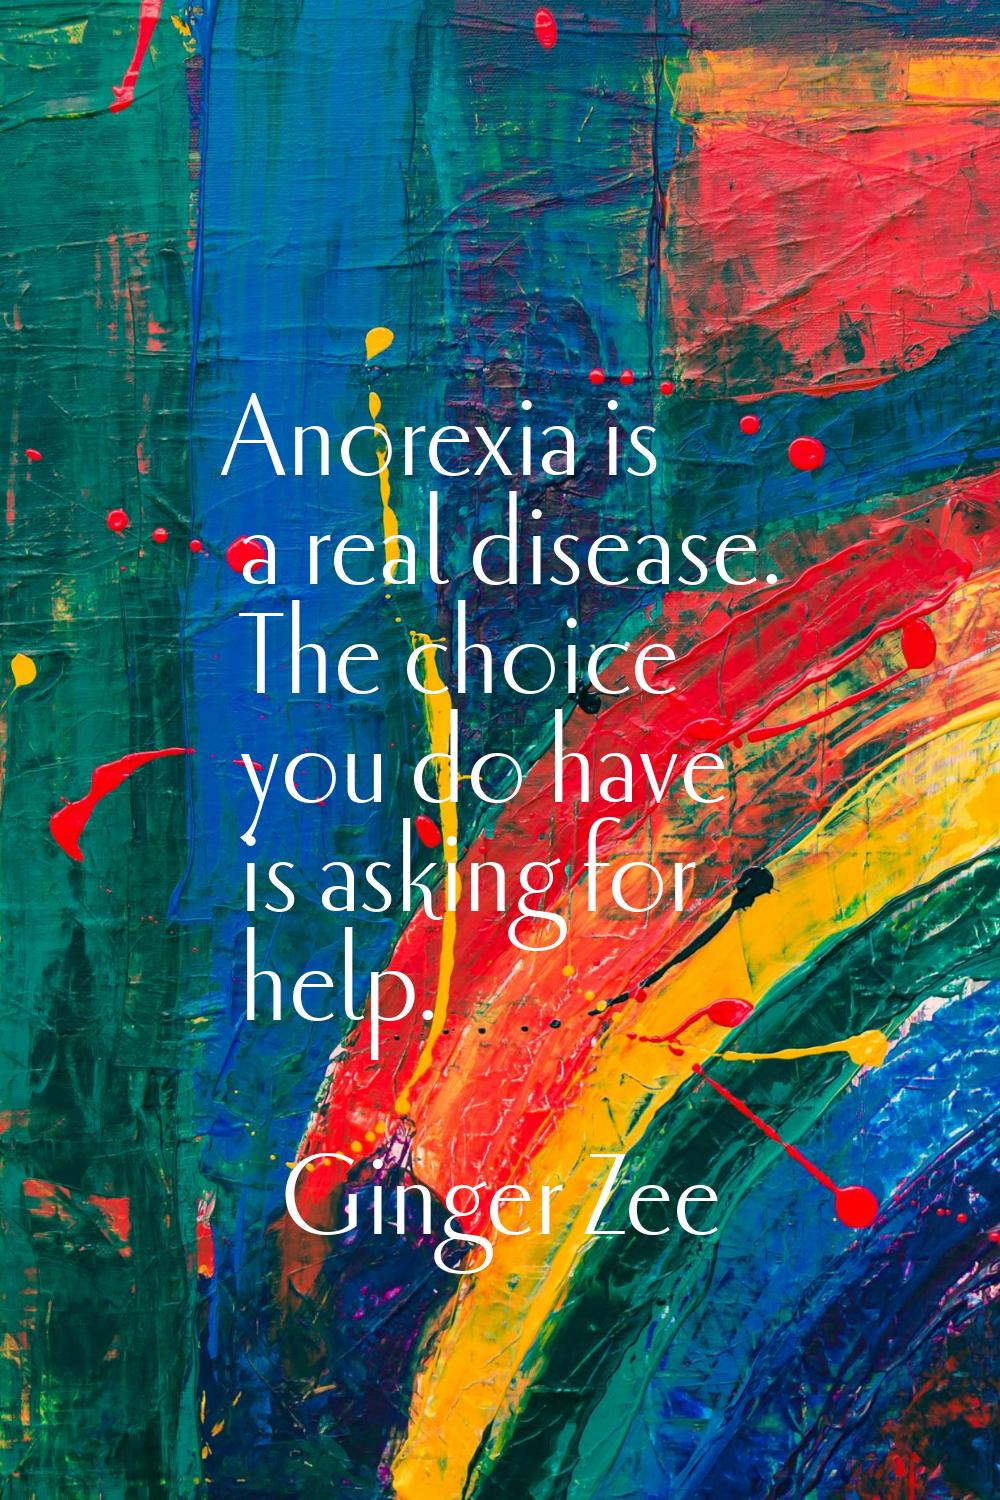 Anorexia is a real disease. The choice you do have is asking for help.